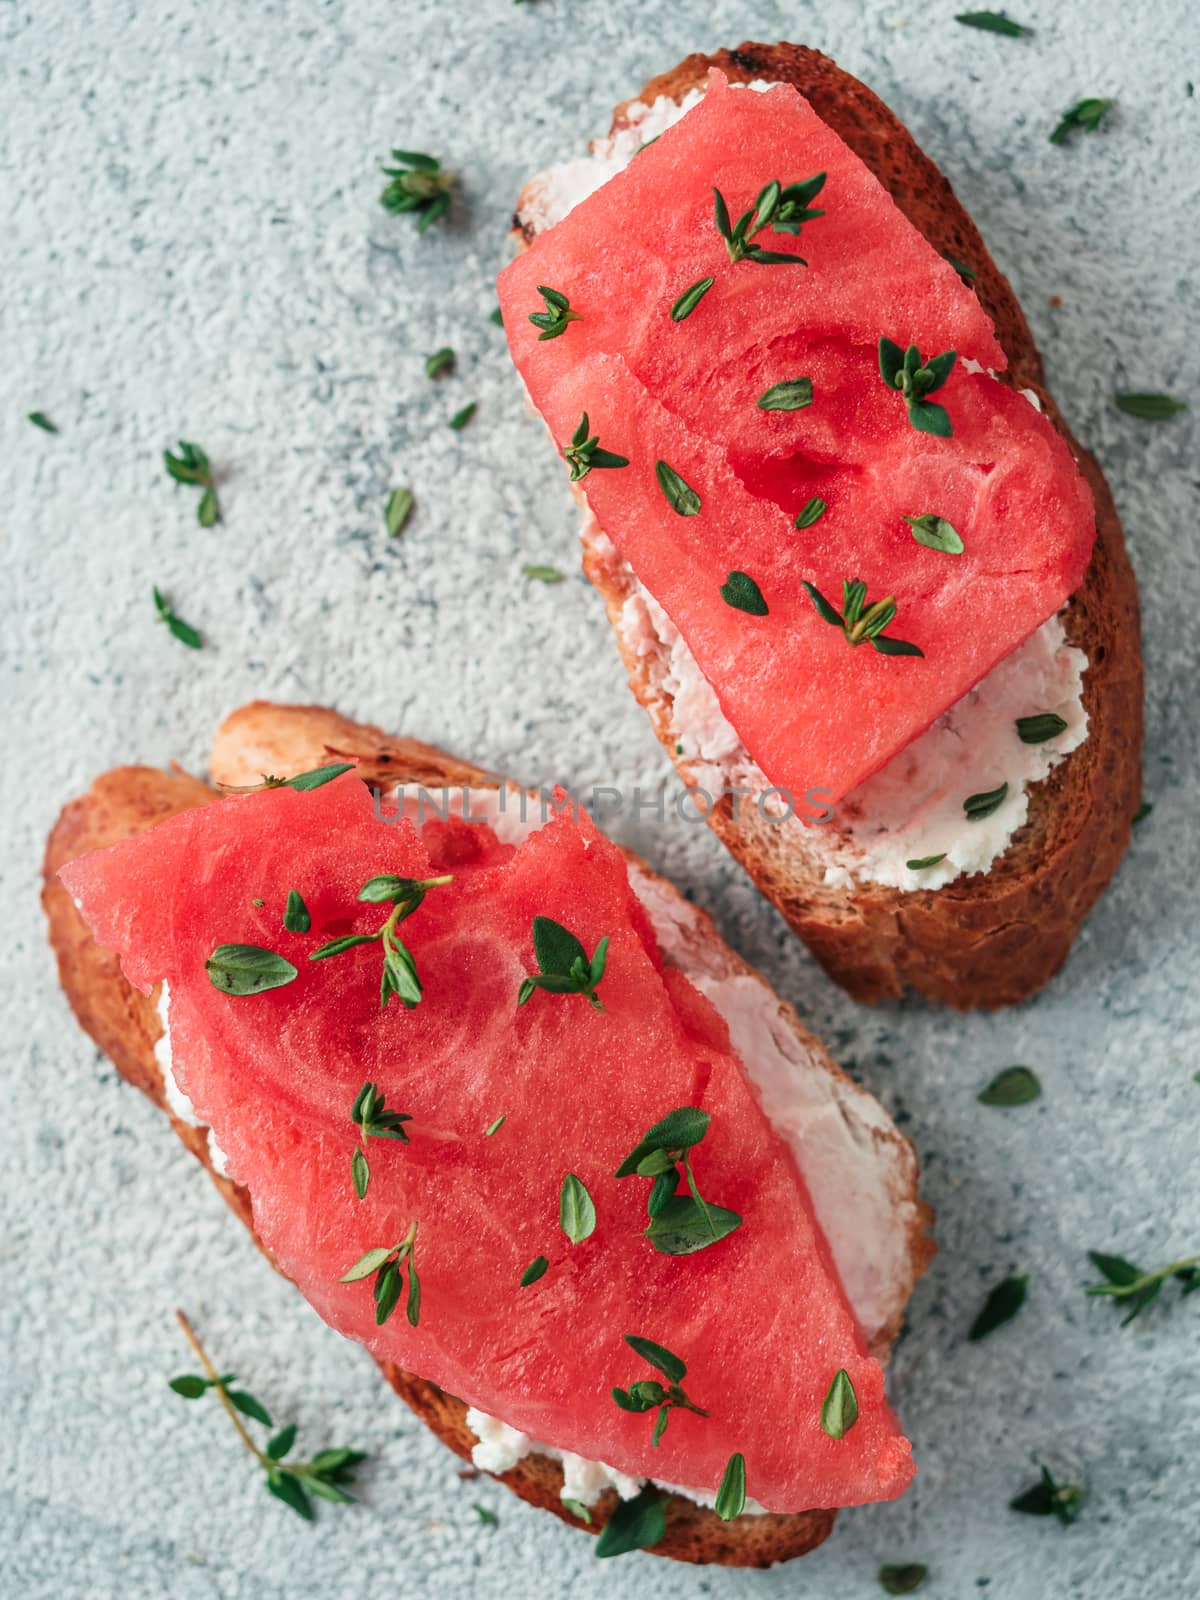 Toasts with soft cheese and watermelon.Salty cheese,sweet watermelon and spicy thyme on crispy grilled bread slices.Idea and recipe for unusual healthy breakfast,summer snack or lunch.Top view flatlay